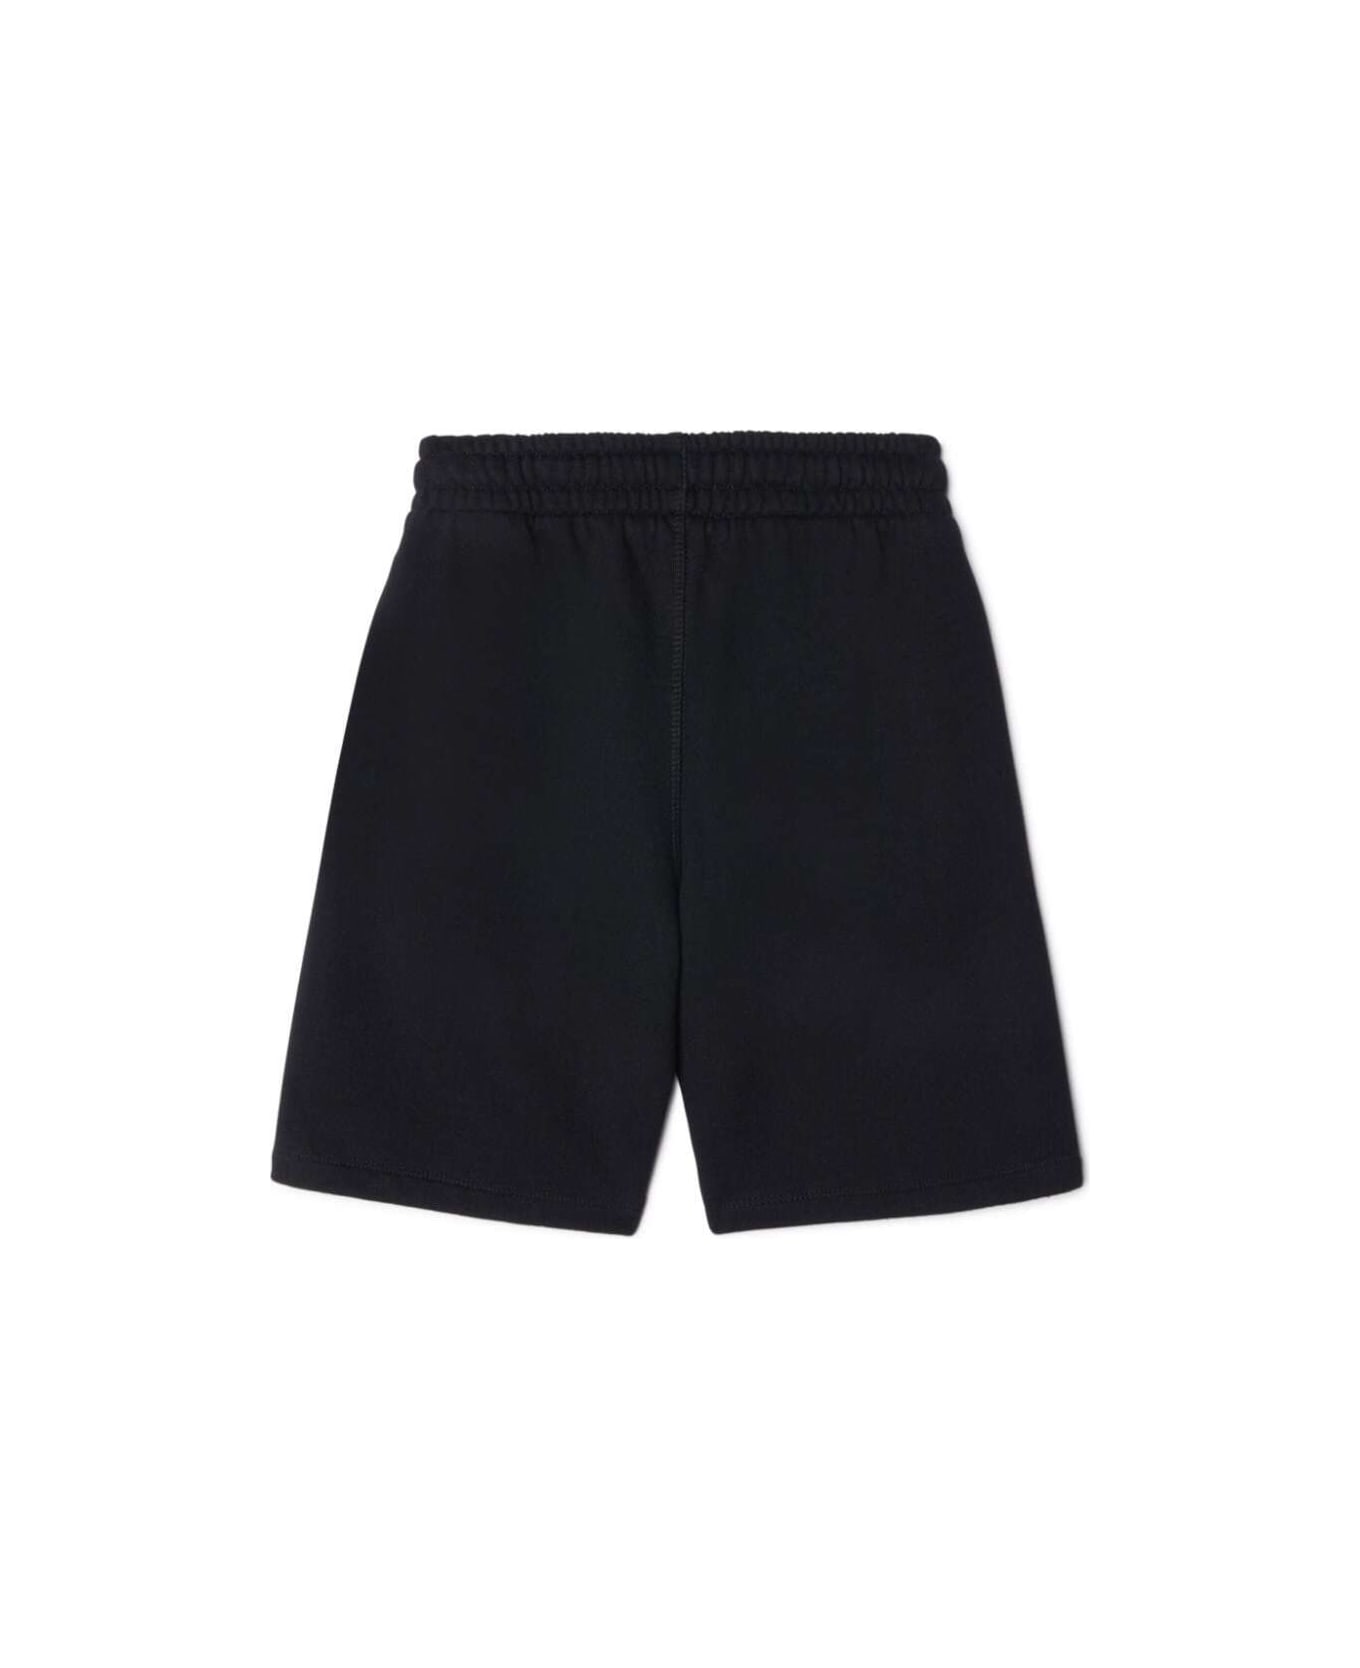 Off-White Black Shorts With Drawstring In Cotton Boy - Black ボトムス